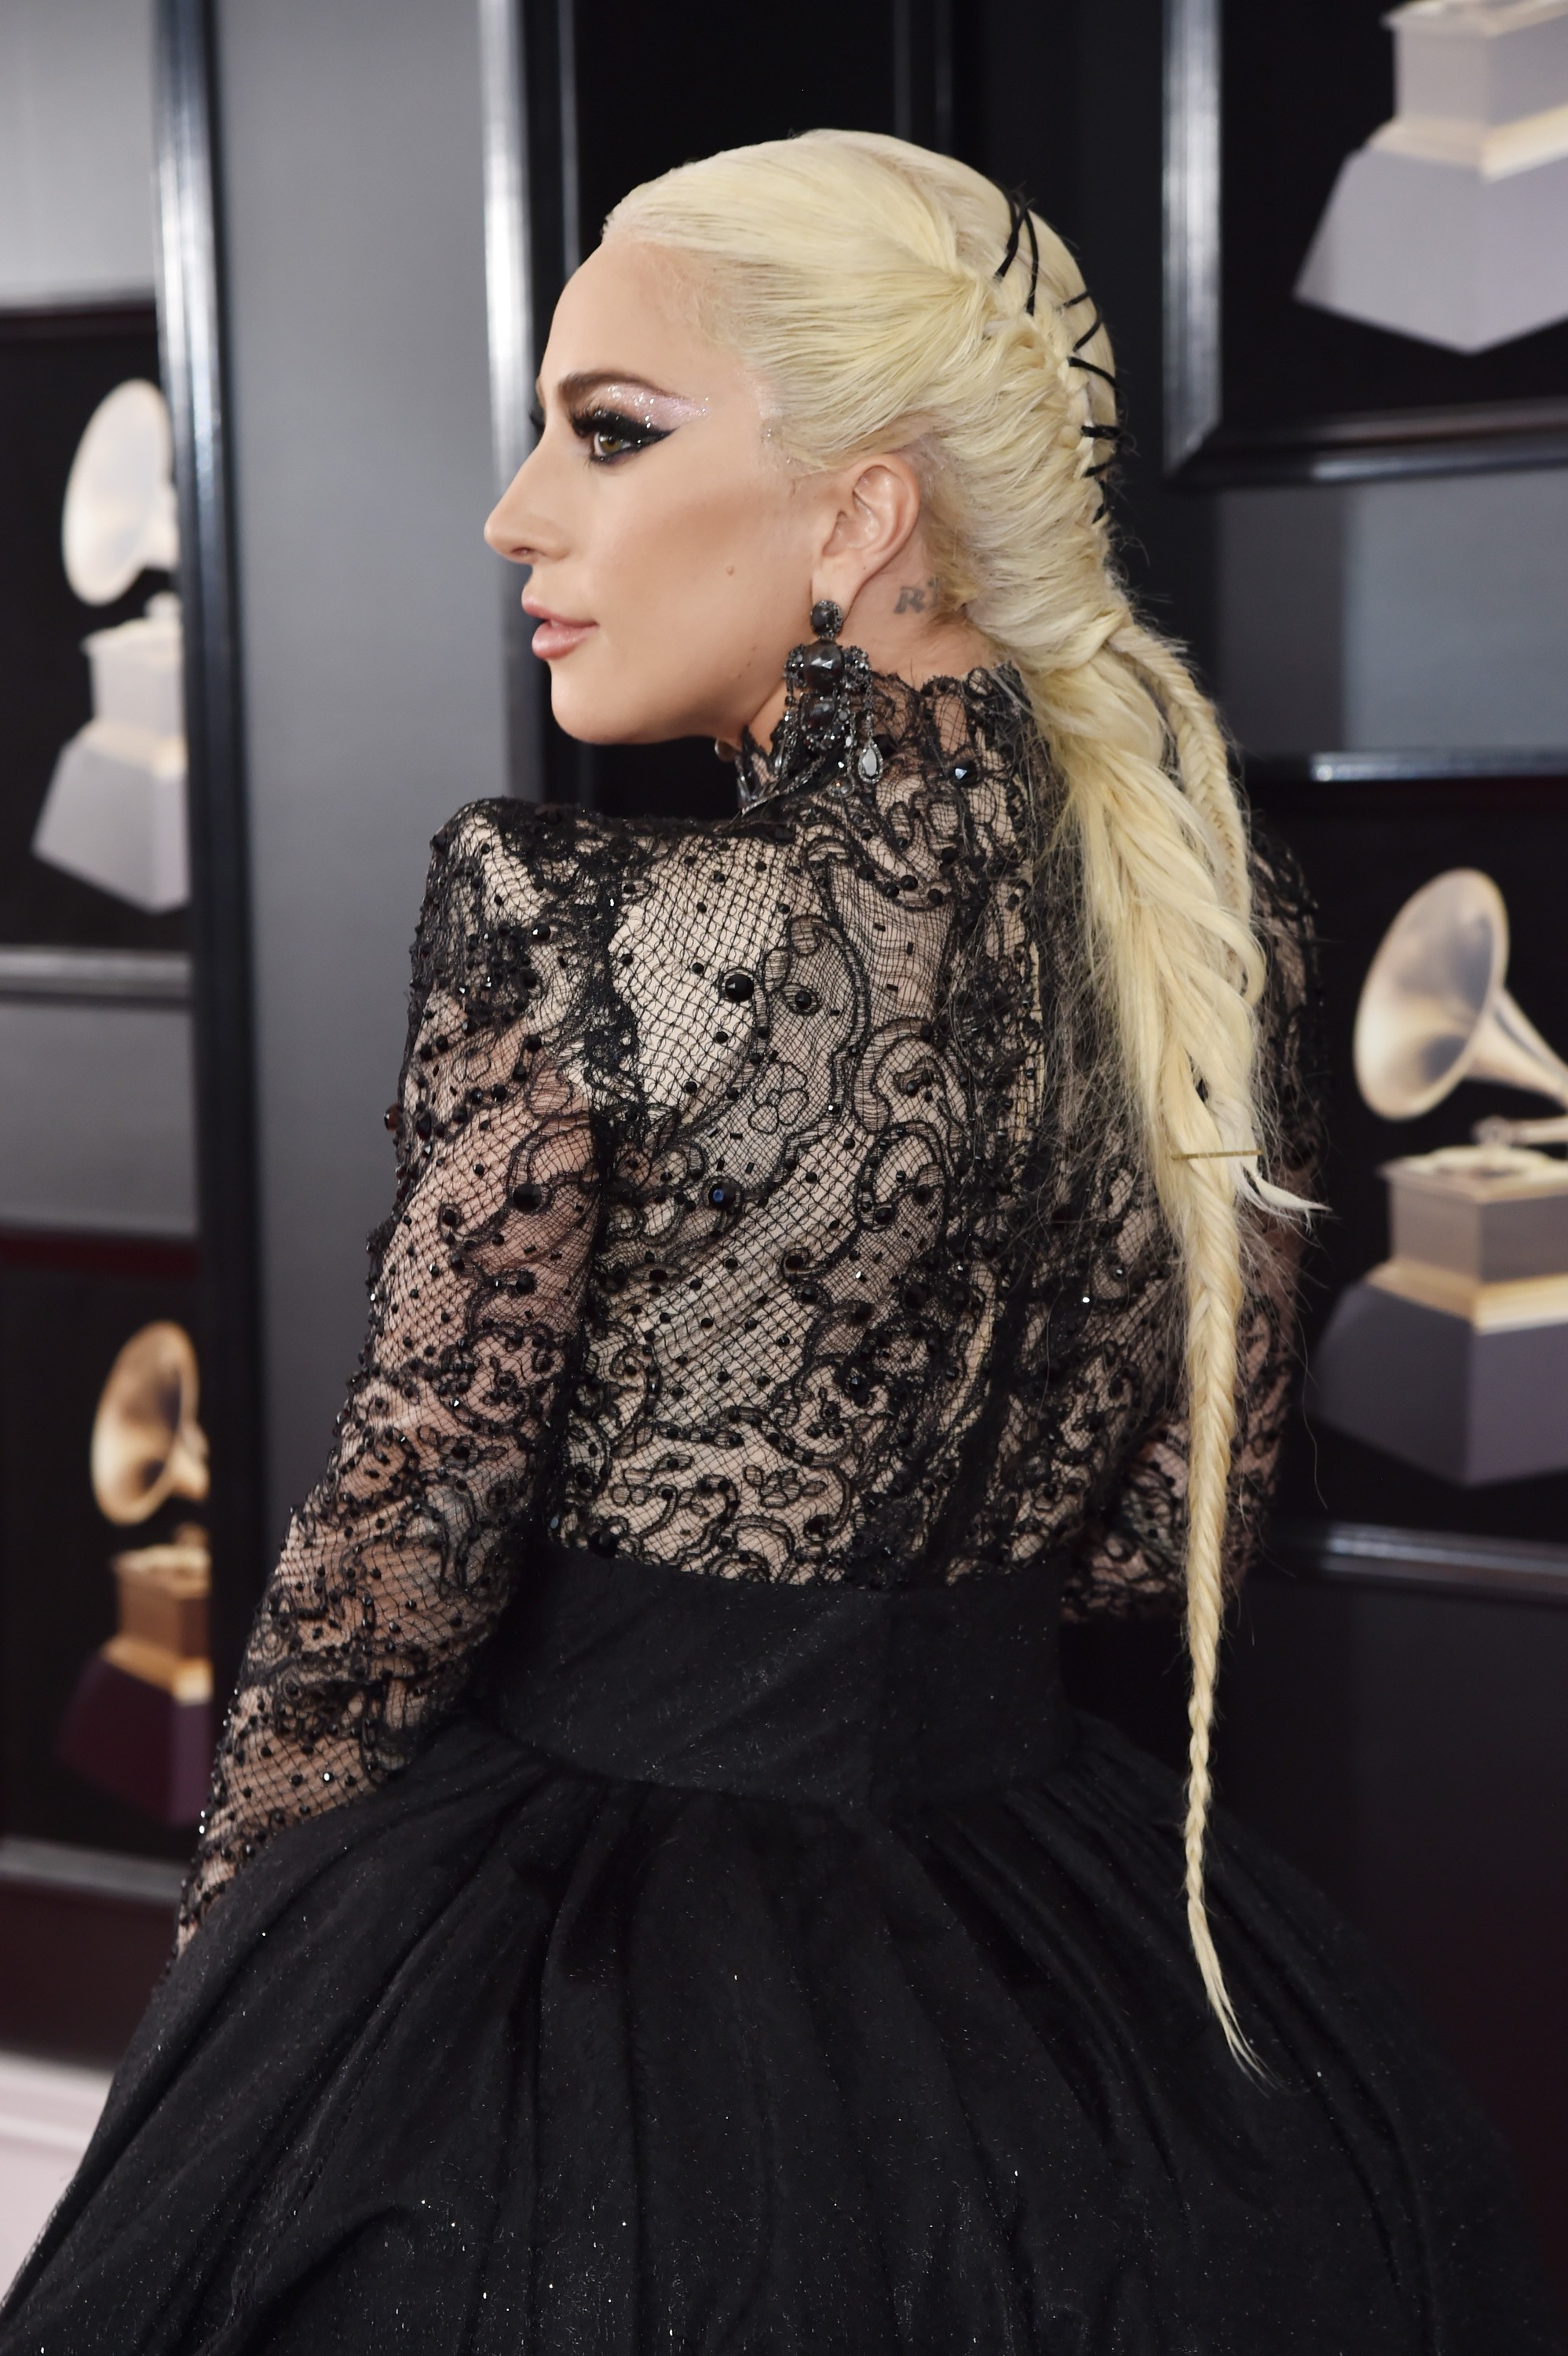 NEW YORK, NY - JANUARY 28:  Recording artist Lady Gaga attends the 60th Annual GRAMMY Awards at Madison Square Garden on January 28, 2018 in New York City.  (Photo by Kevin Mazur/Getty Images for NARAS) (Foto: Getty Images for NARAS)